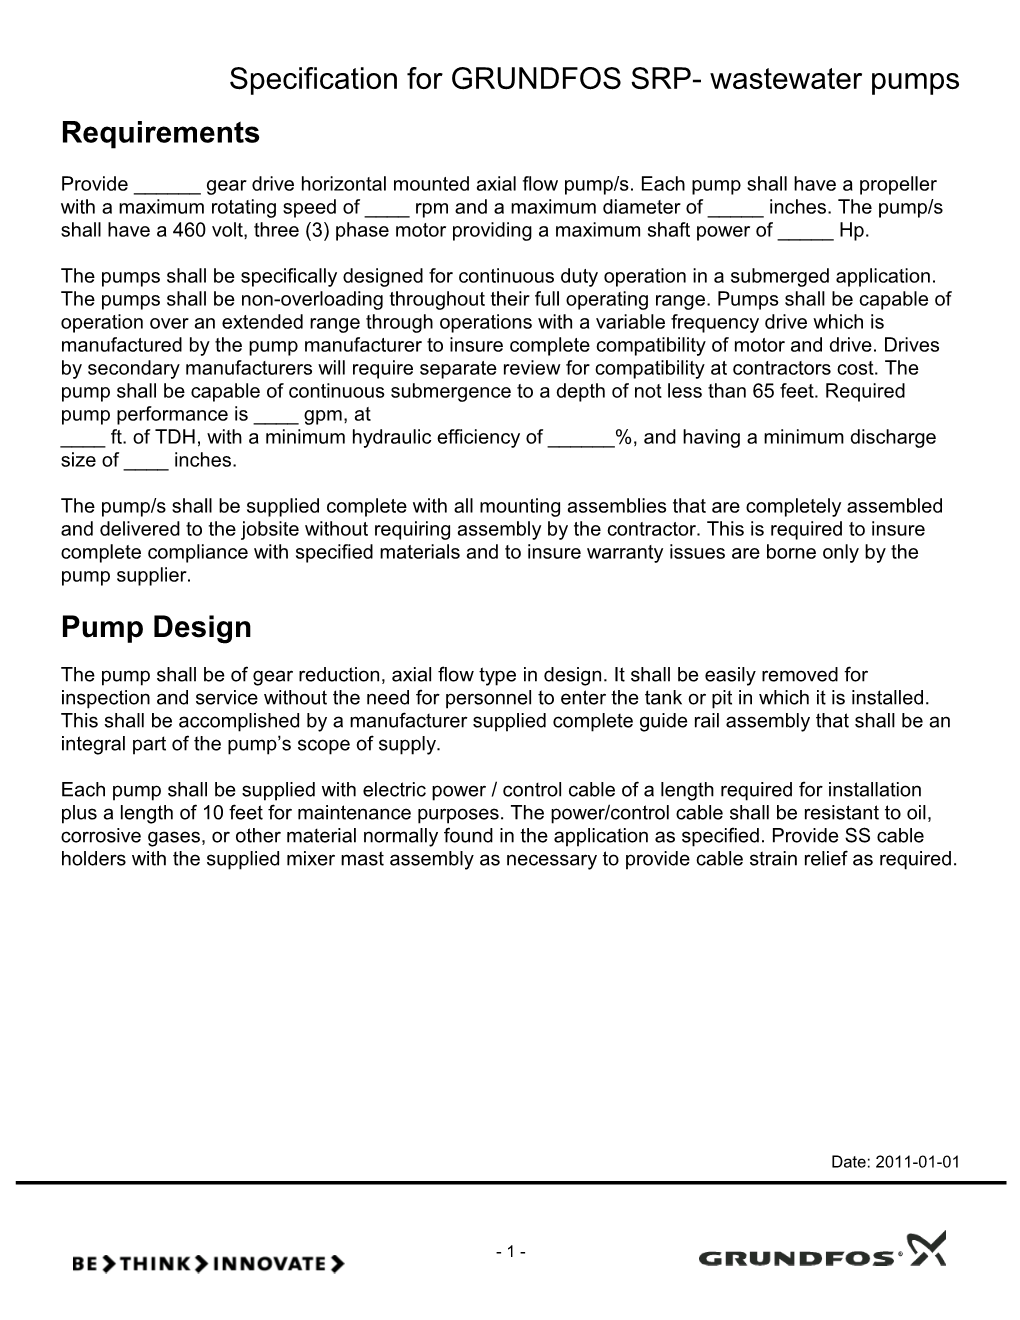 Specification for GRUNDFOS SRP- Wastewater Pumps